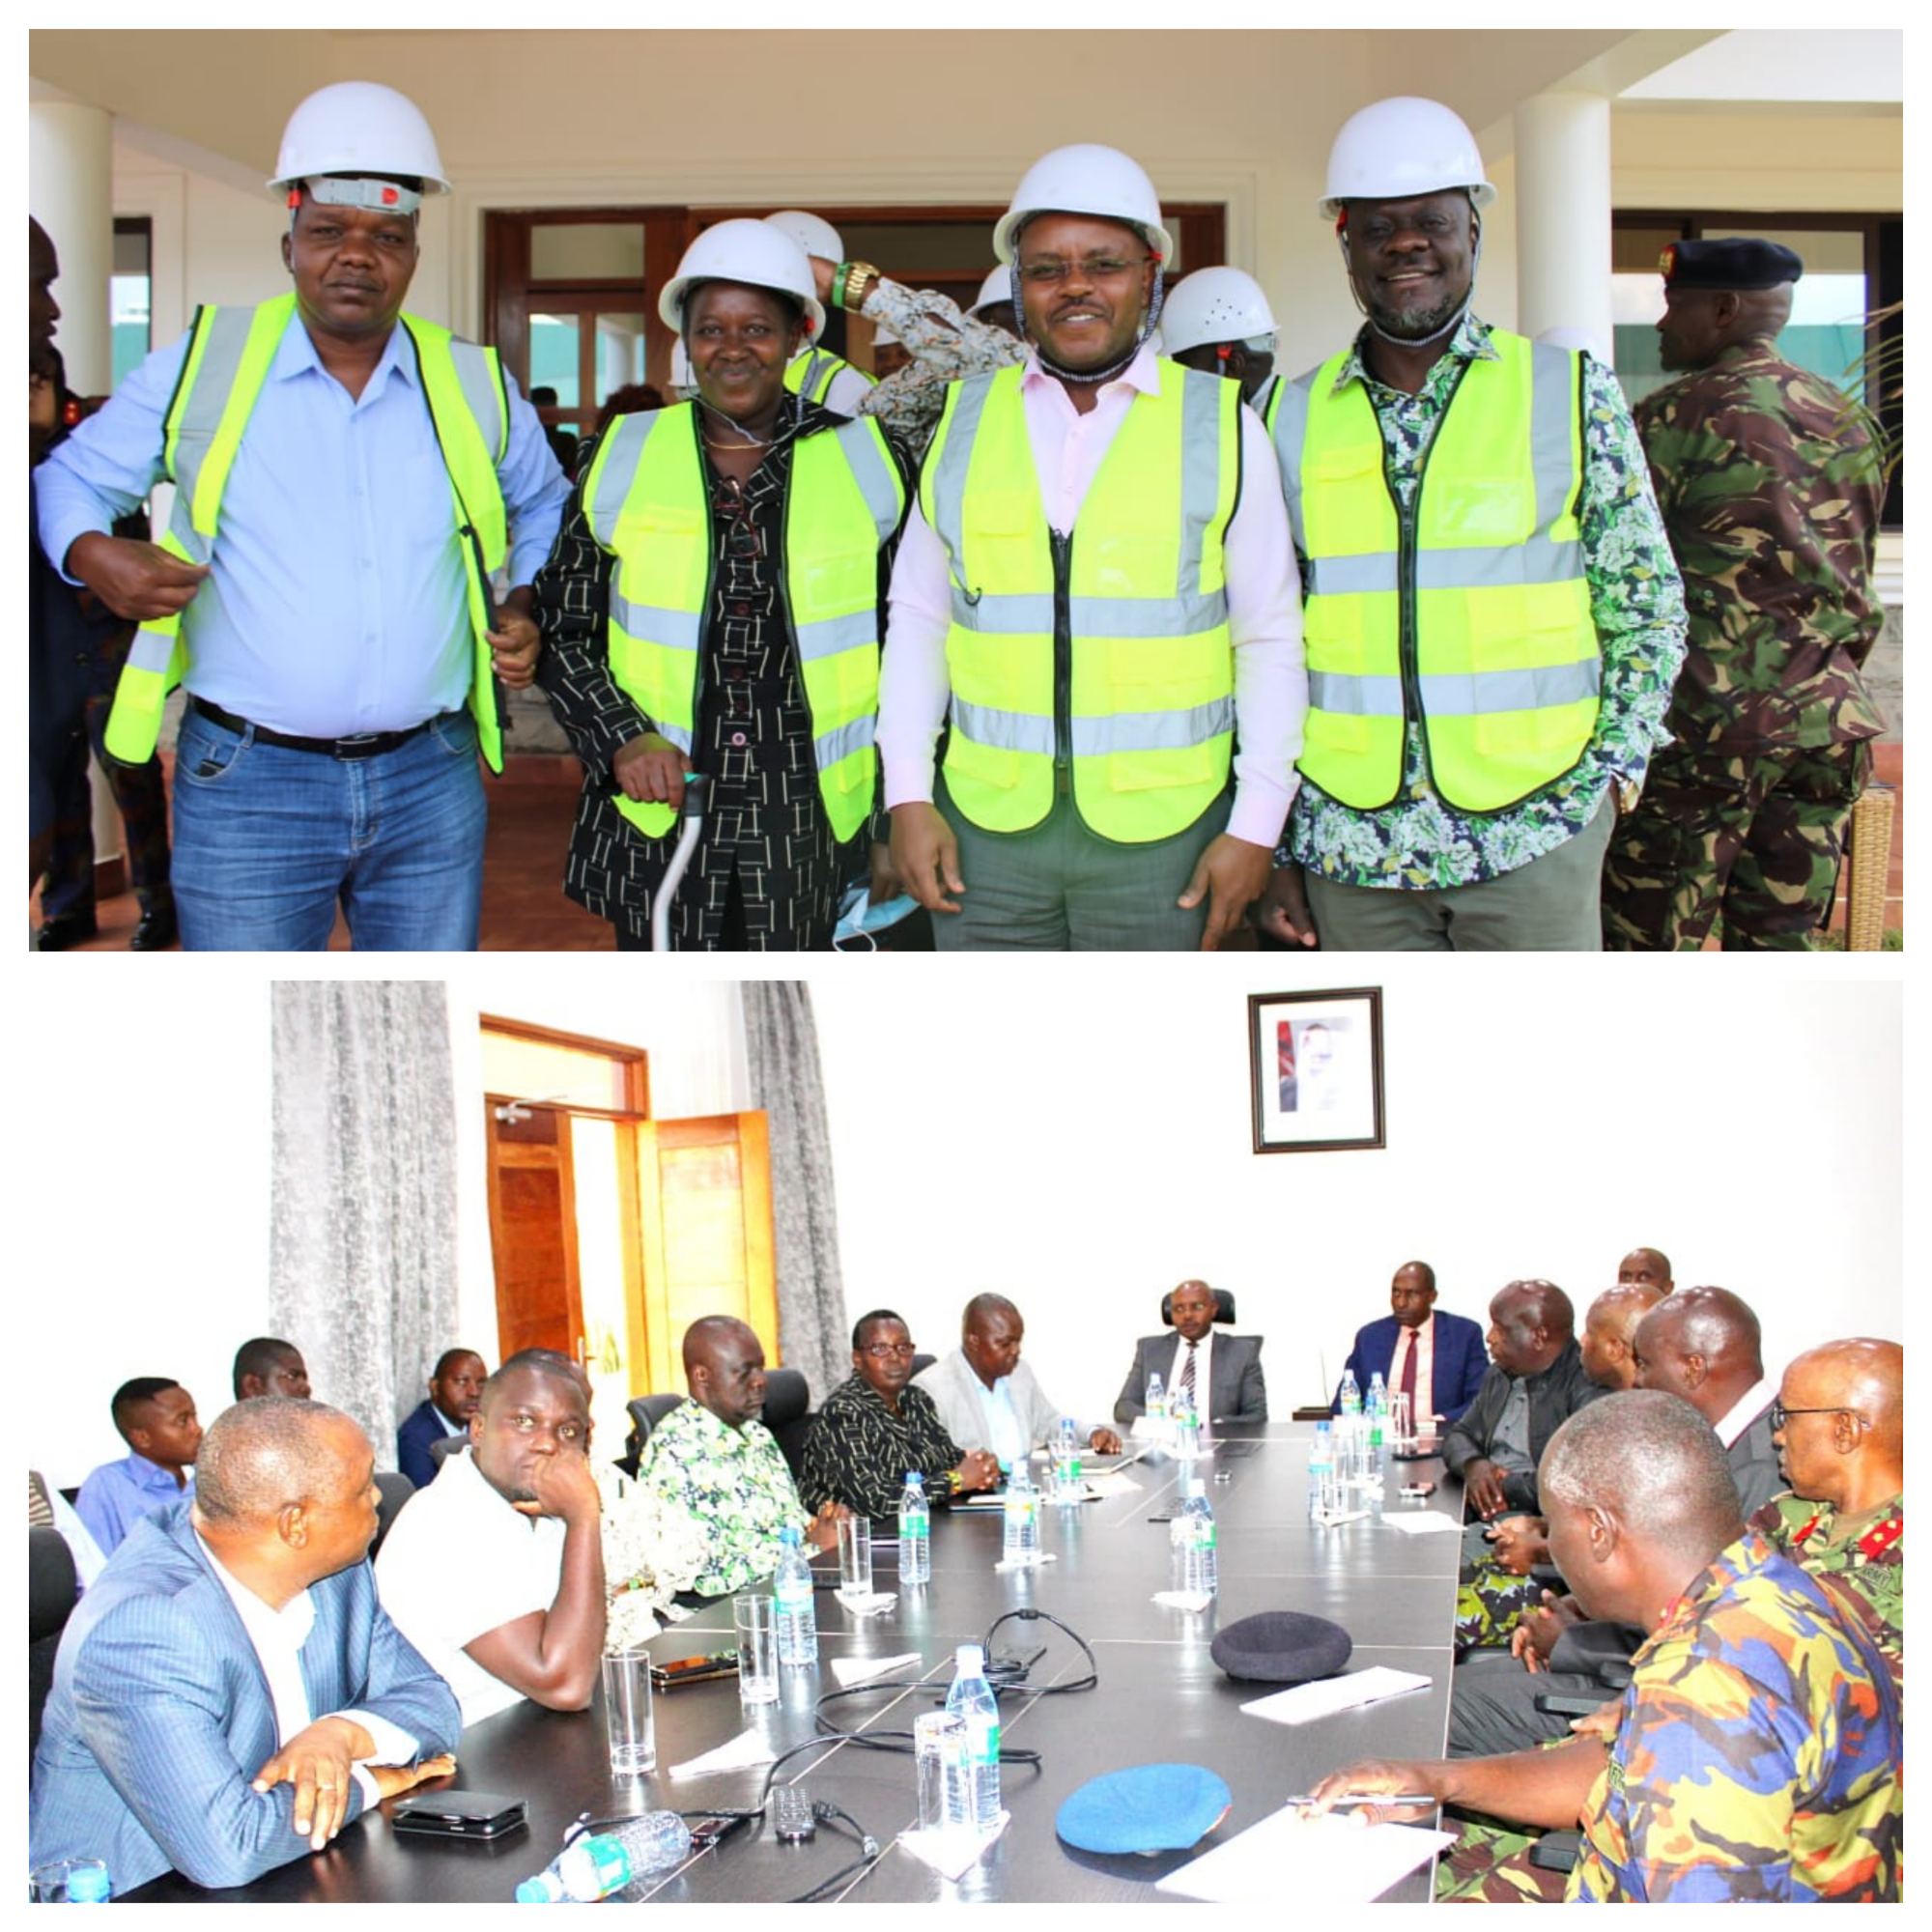 PETITIONS COMMITTEE INSPECTS LEVEL 6 FORCES RESEARCH REFERRAL HOSPITAL PROJECT